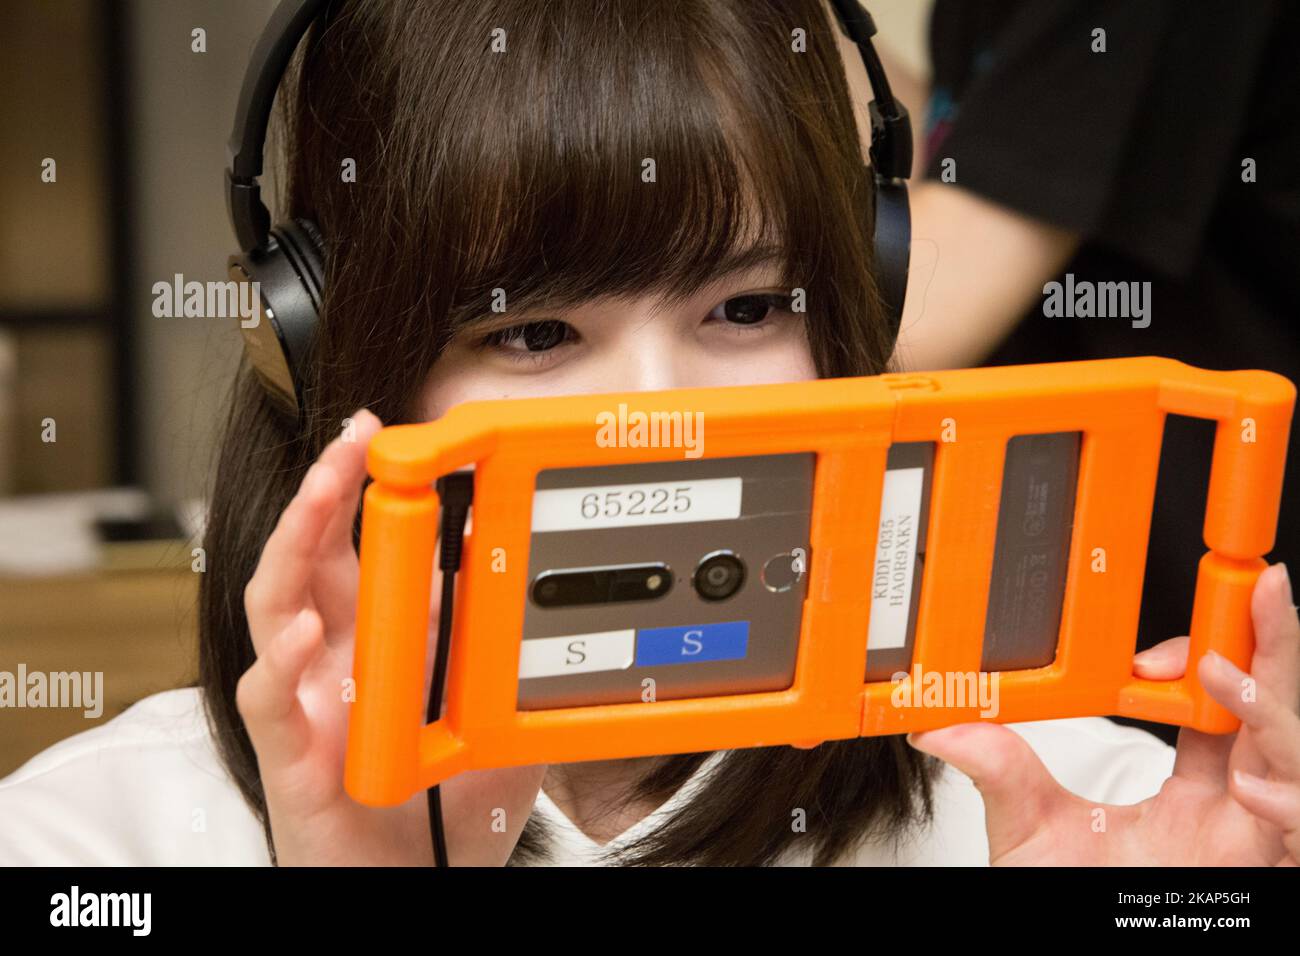 SENDAI, JAPAN - JULY 8: Anime fan holding a smart phone equipped with augmented reality (AR) application enjoying his virtual idol Hatsune Miku while having some sweets during an event in Sendai, Japan on July 8, 2017. As part of a promotion with telecommunications provider au/KDDI, Crypton Future Media and Blue Leaf Cafe operator, guest can enjoy dining with a special menu with their Vocaloid superstarIdol Hatsune Miku several days. (Photo by Richard Atrero de Guzman/NUR Photo) (Photo by Richard Atrero de Guzman/NurPhoto) *** Please Use Credit from Credit Field *** Stock Photo